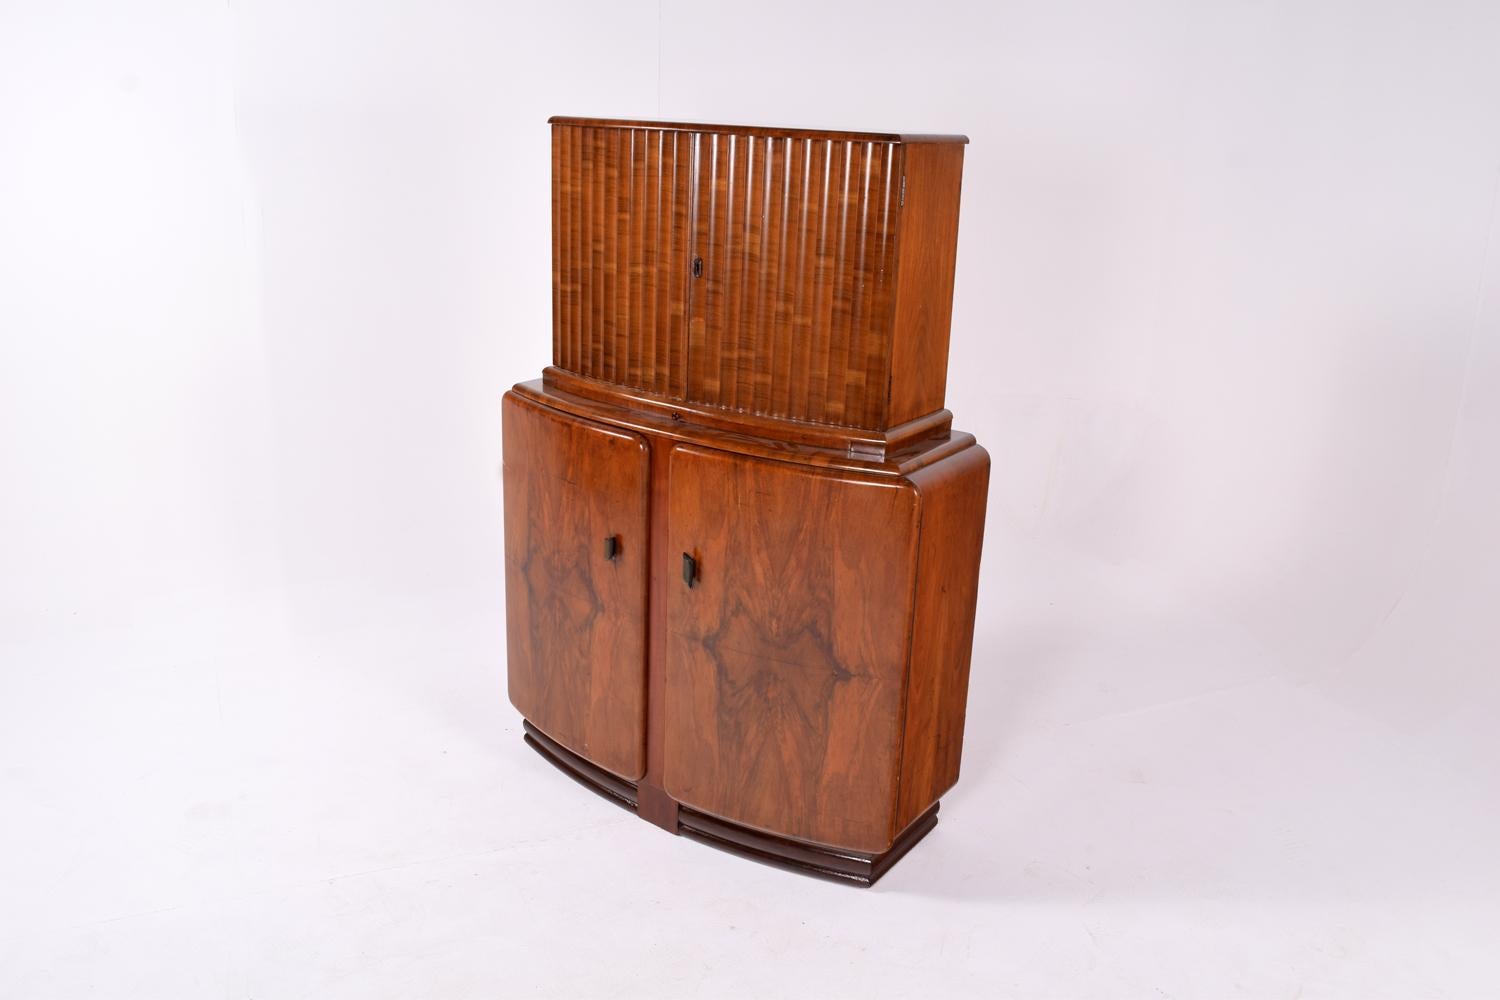 Gorgeous and original 1930s Art Deco cocktail cabinet in figured walnut. Originally from England and made by a company called 'Rivington'. This cocktail cabinet features a storage area for bottles. The top part of the cocktail cabinet has a mirrored